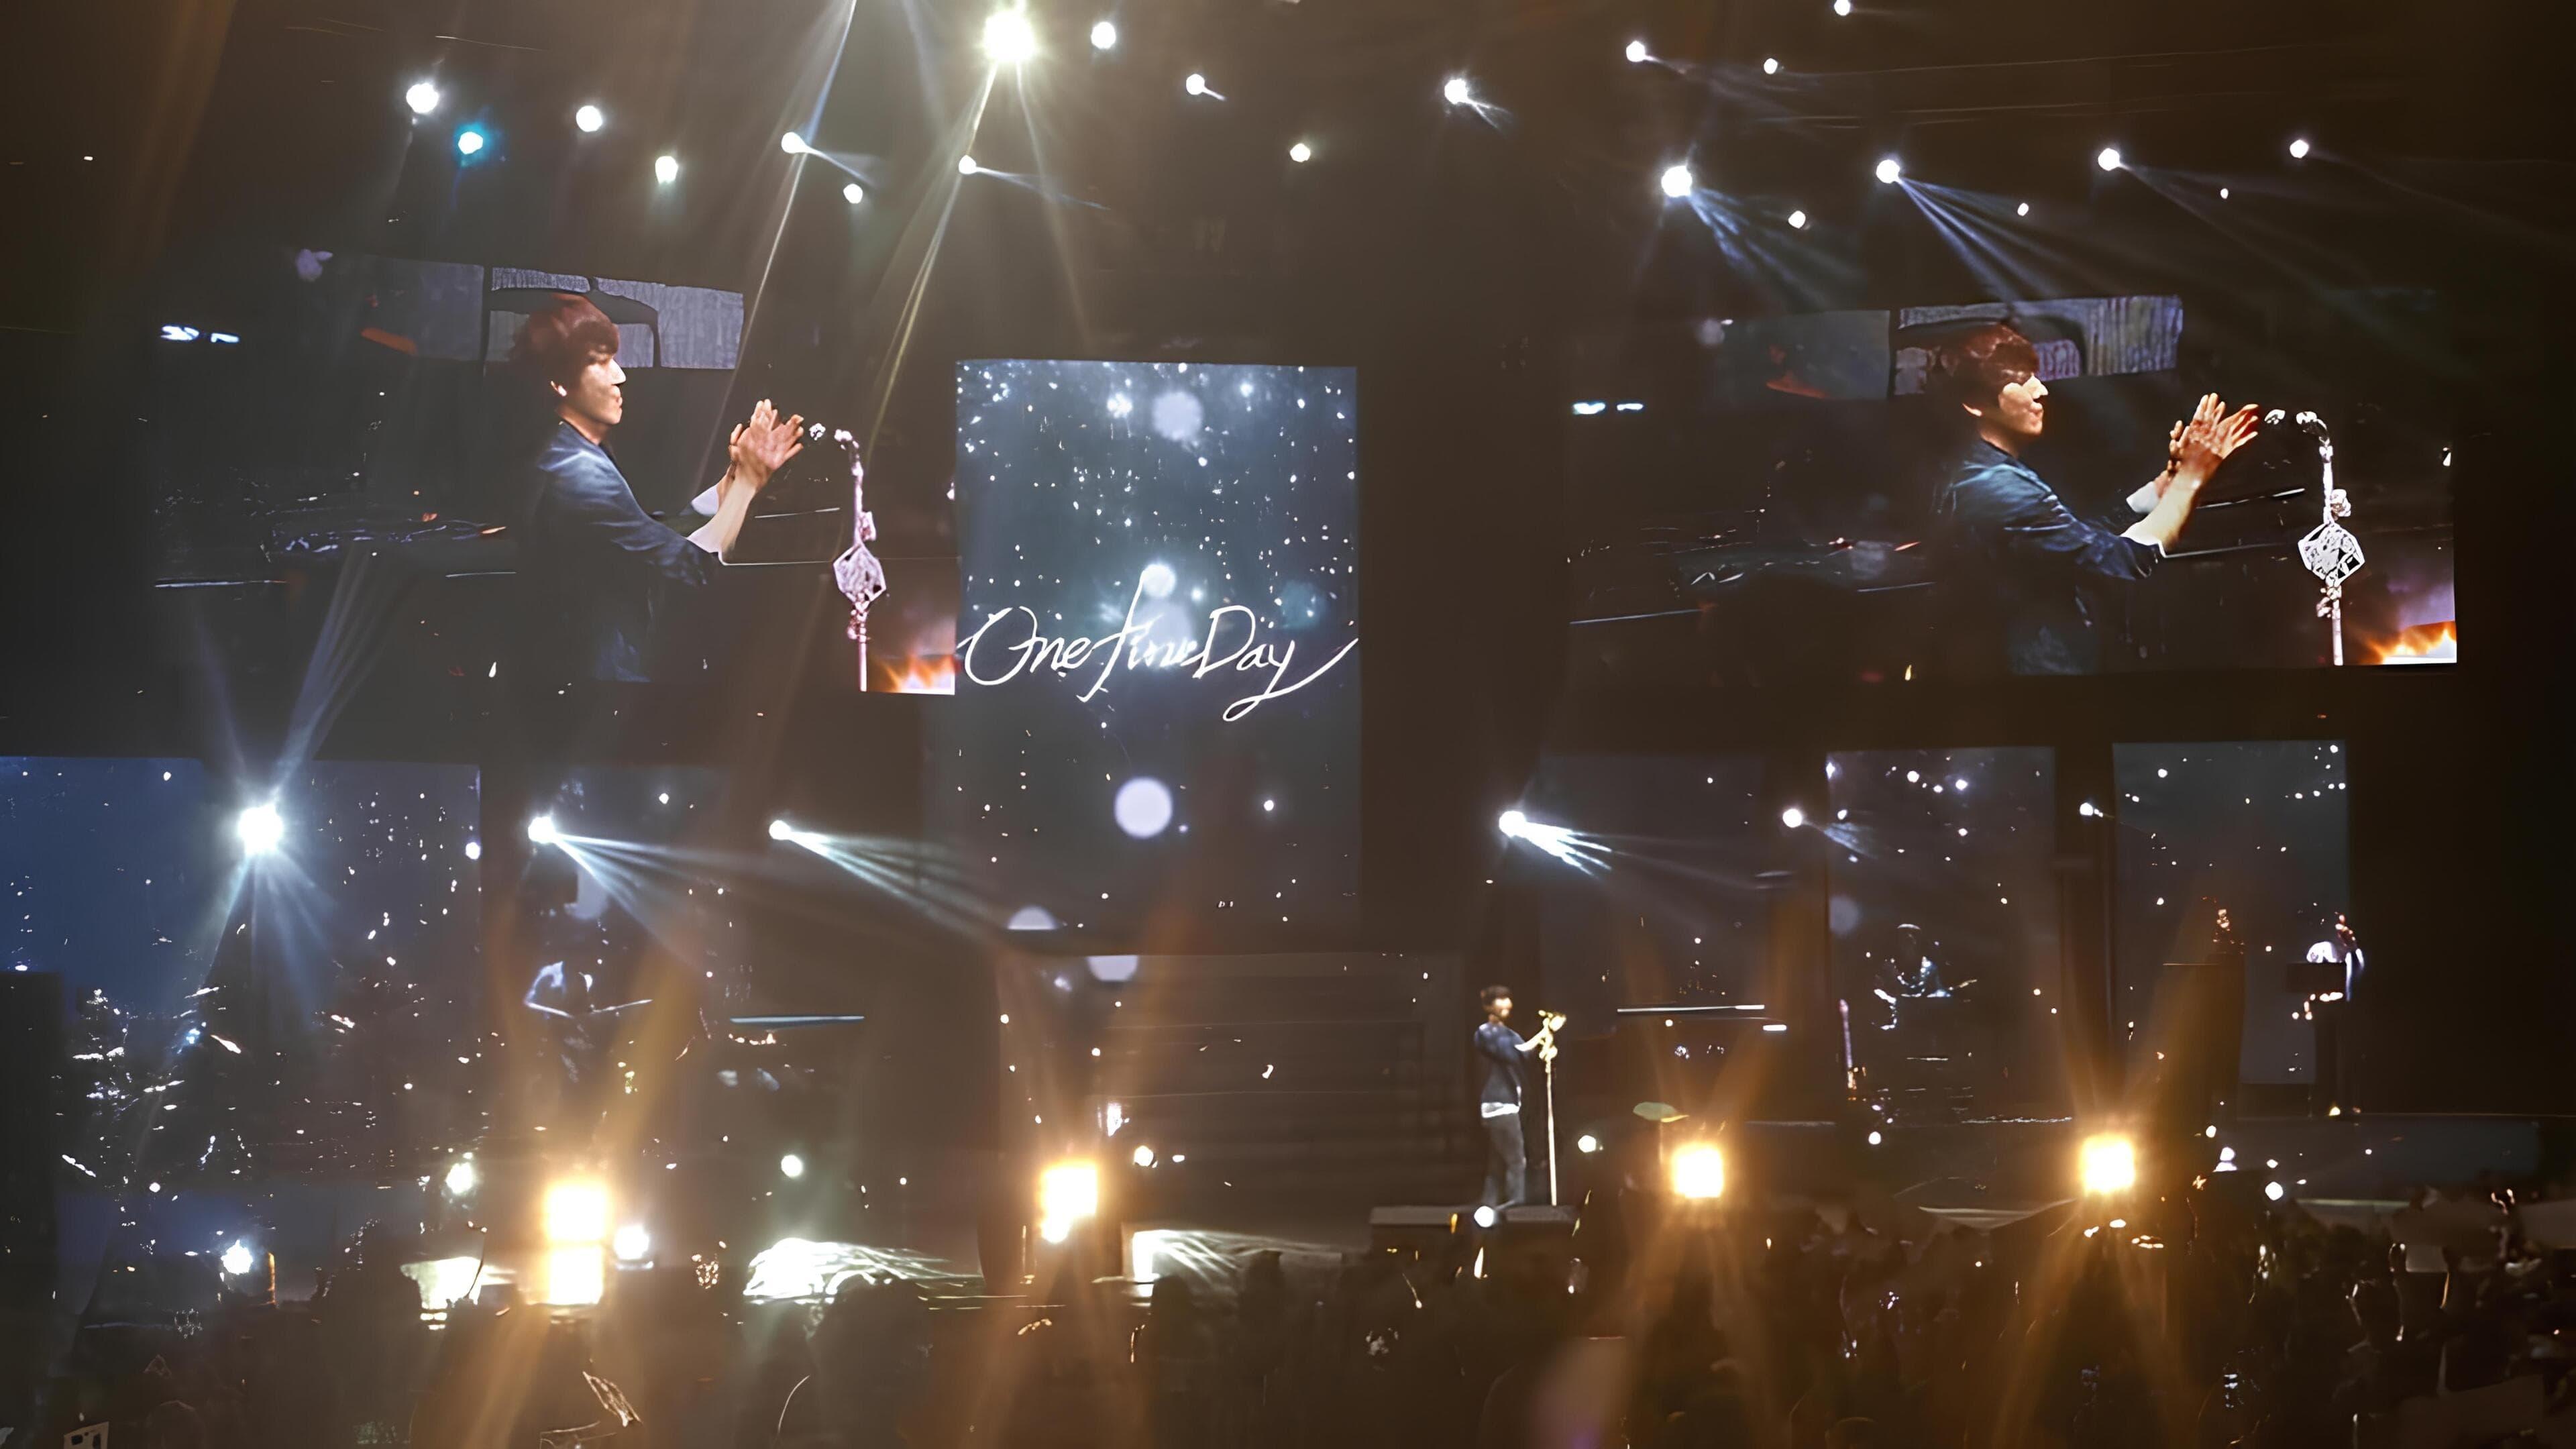 JUNG YONG HWA 1st CONCERT in JAPAN"One Fine Day" backdrop